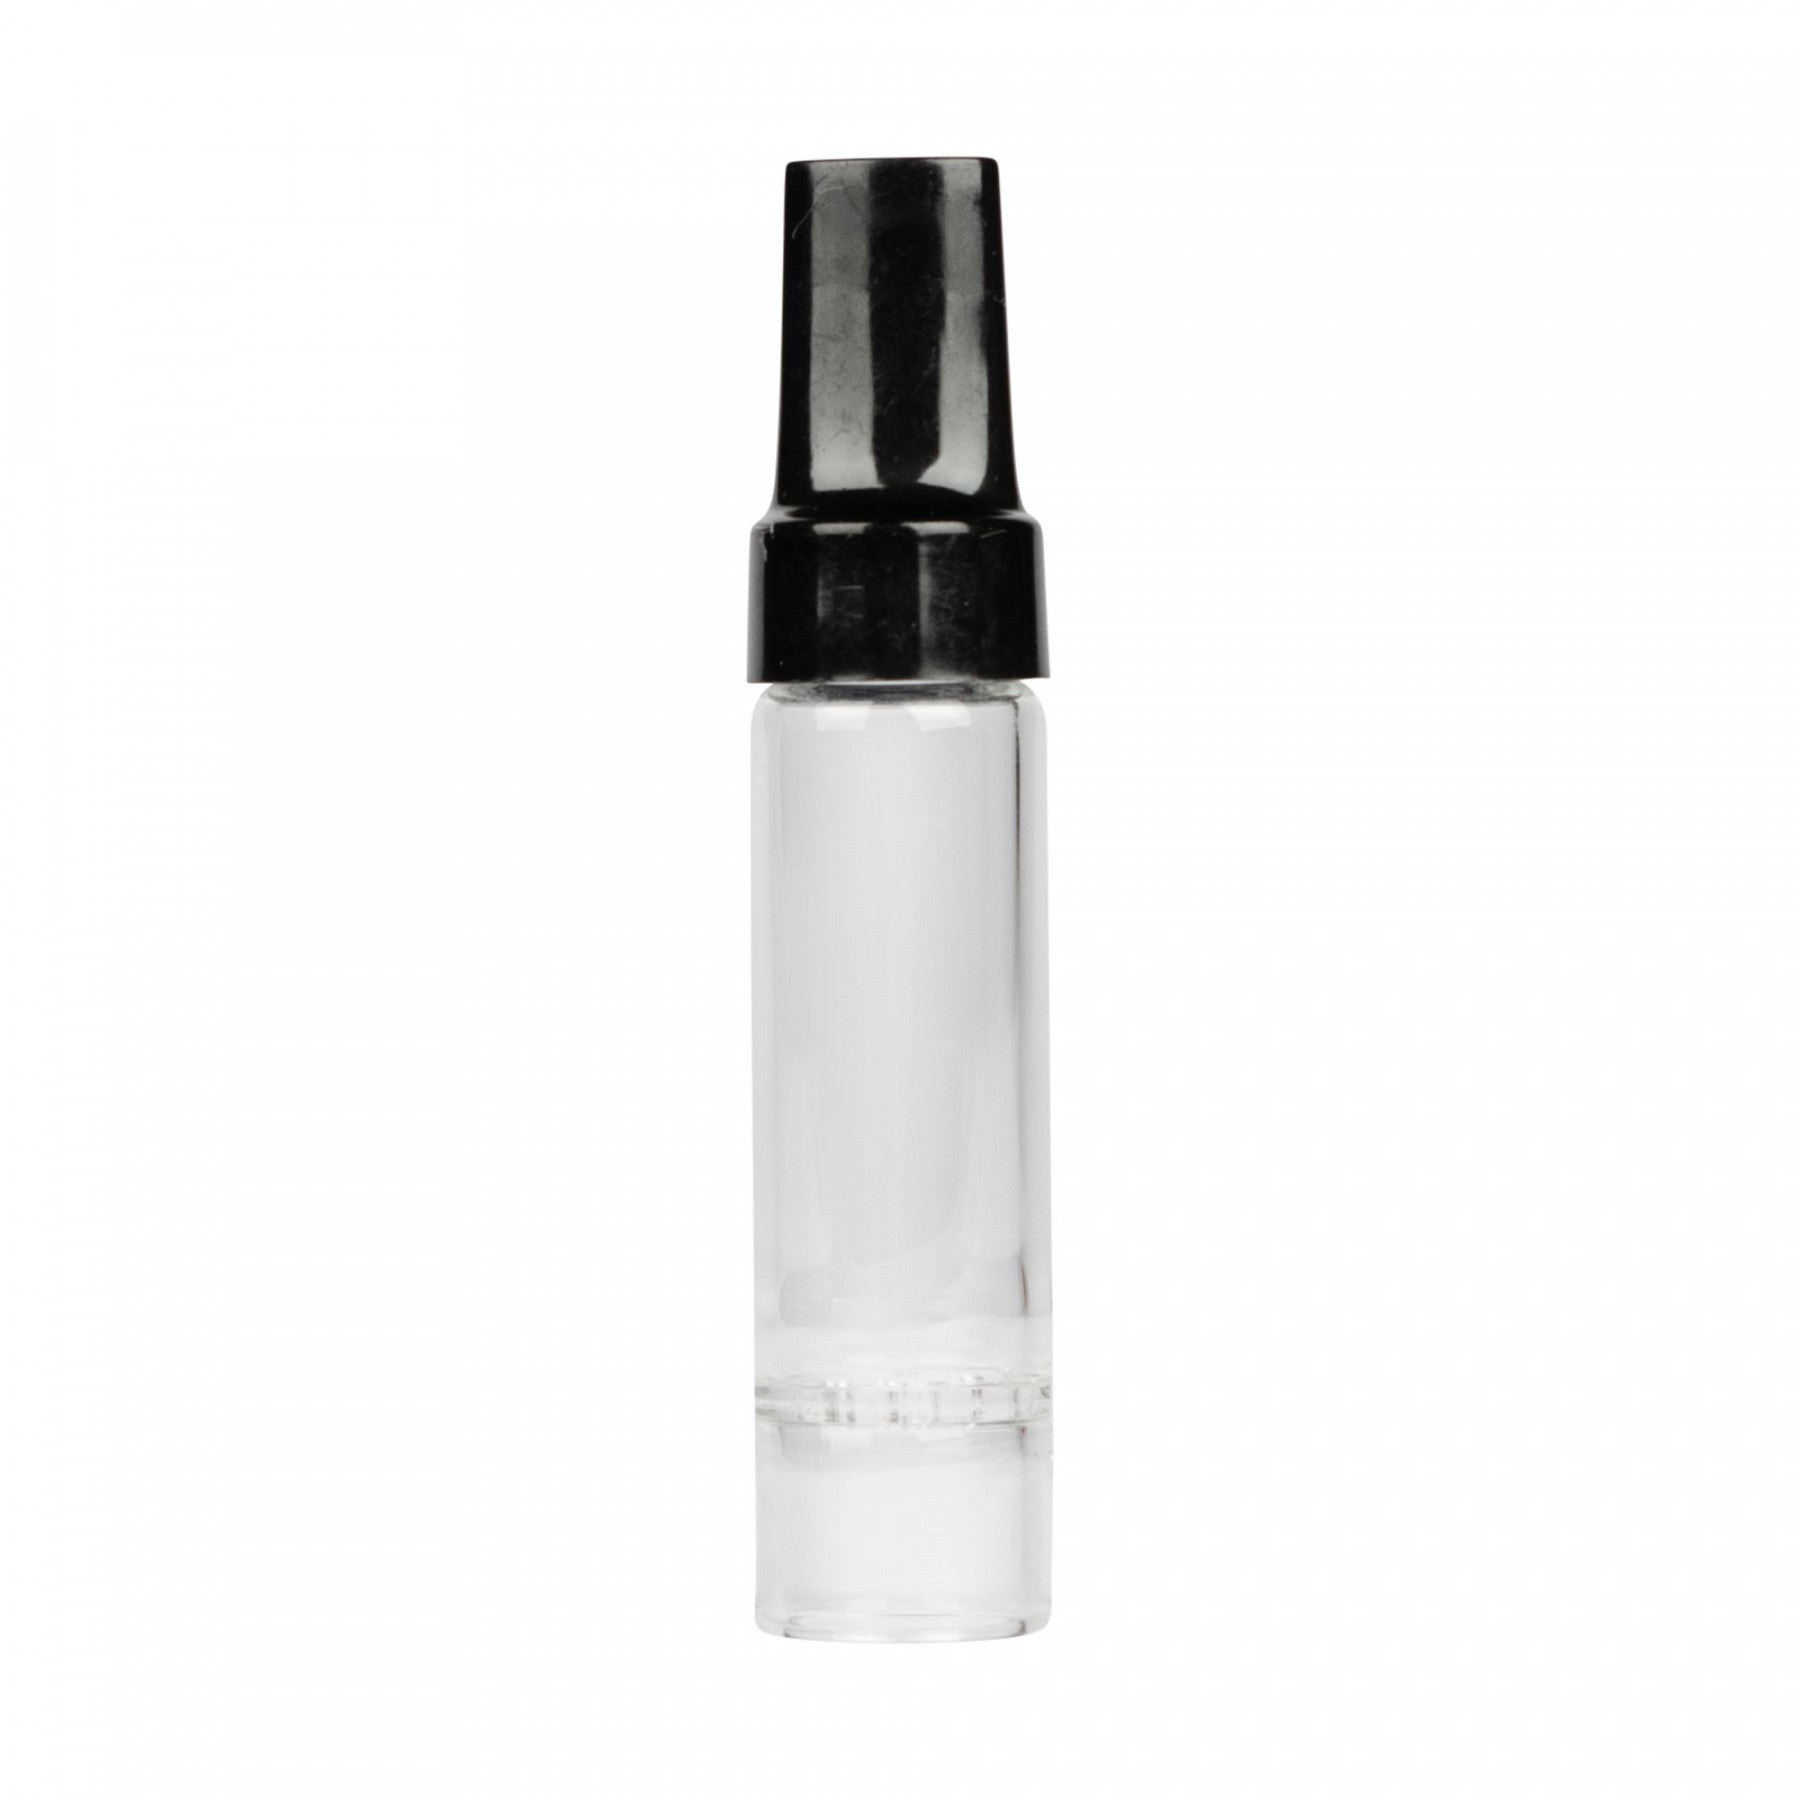 Arizer air glass mouthpiece with black tip